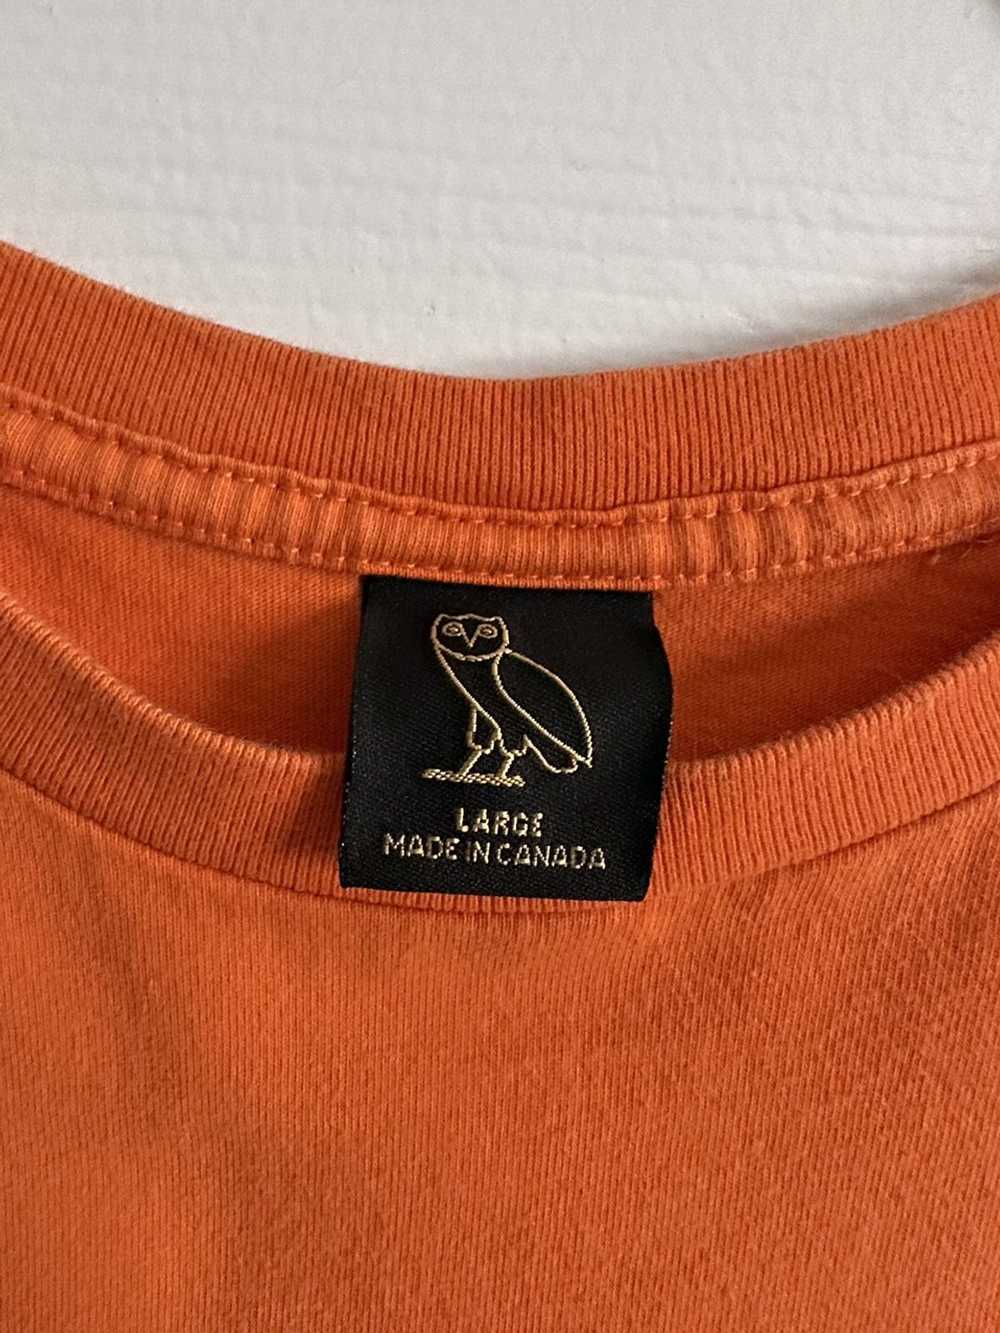 Octobers Very Own SS19 OVO SUMMER TEE - image 3